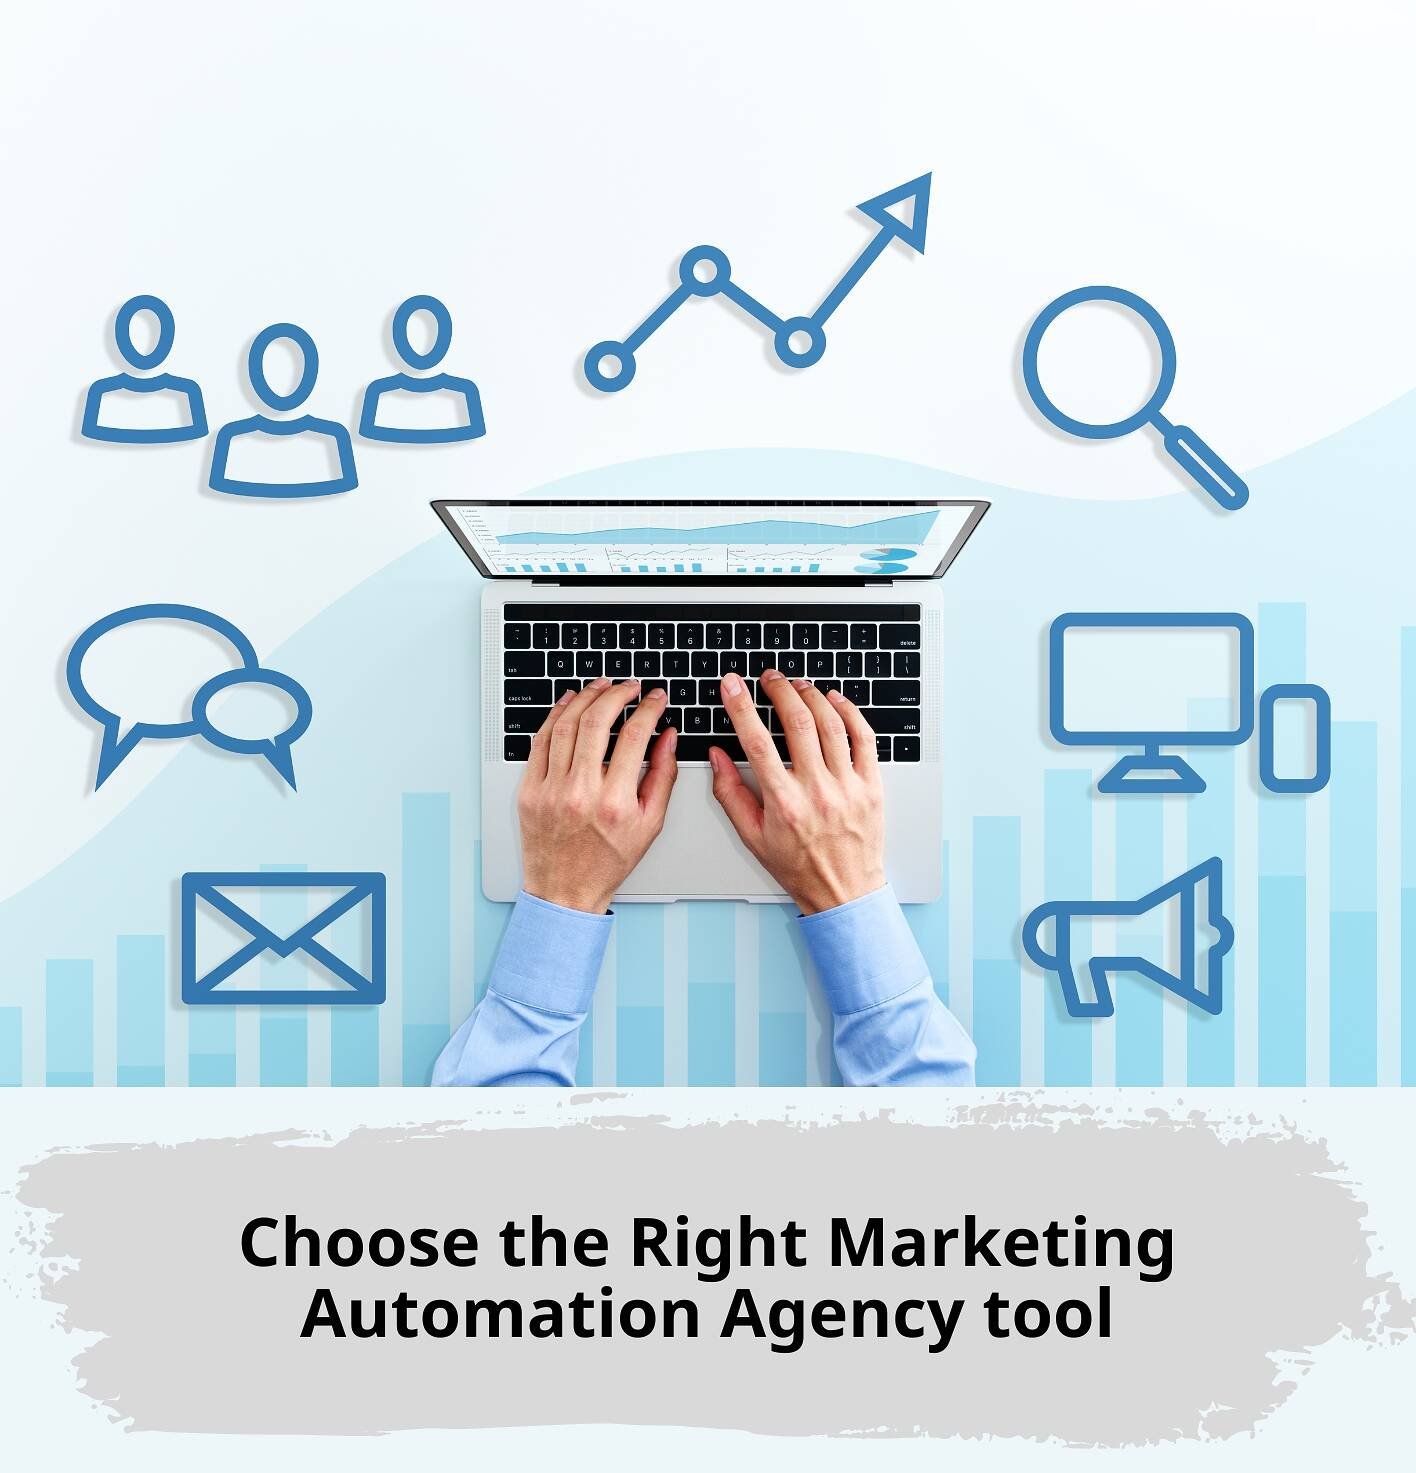 Choosing the Right Marketing Automation Agency Tool